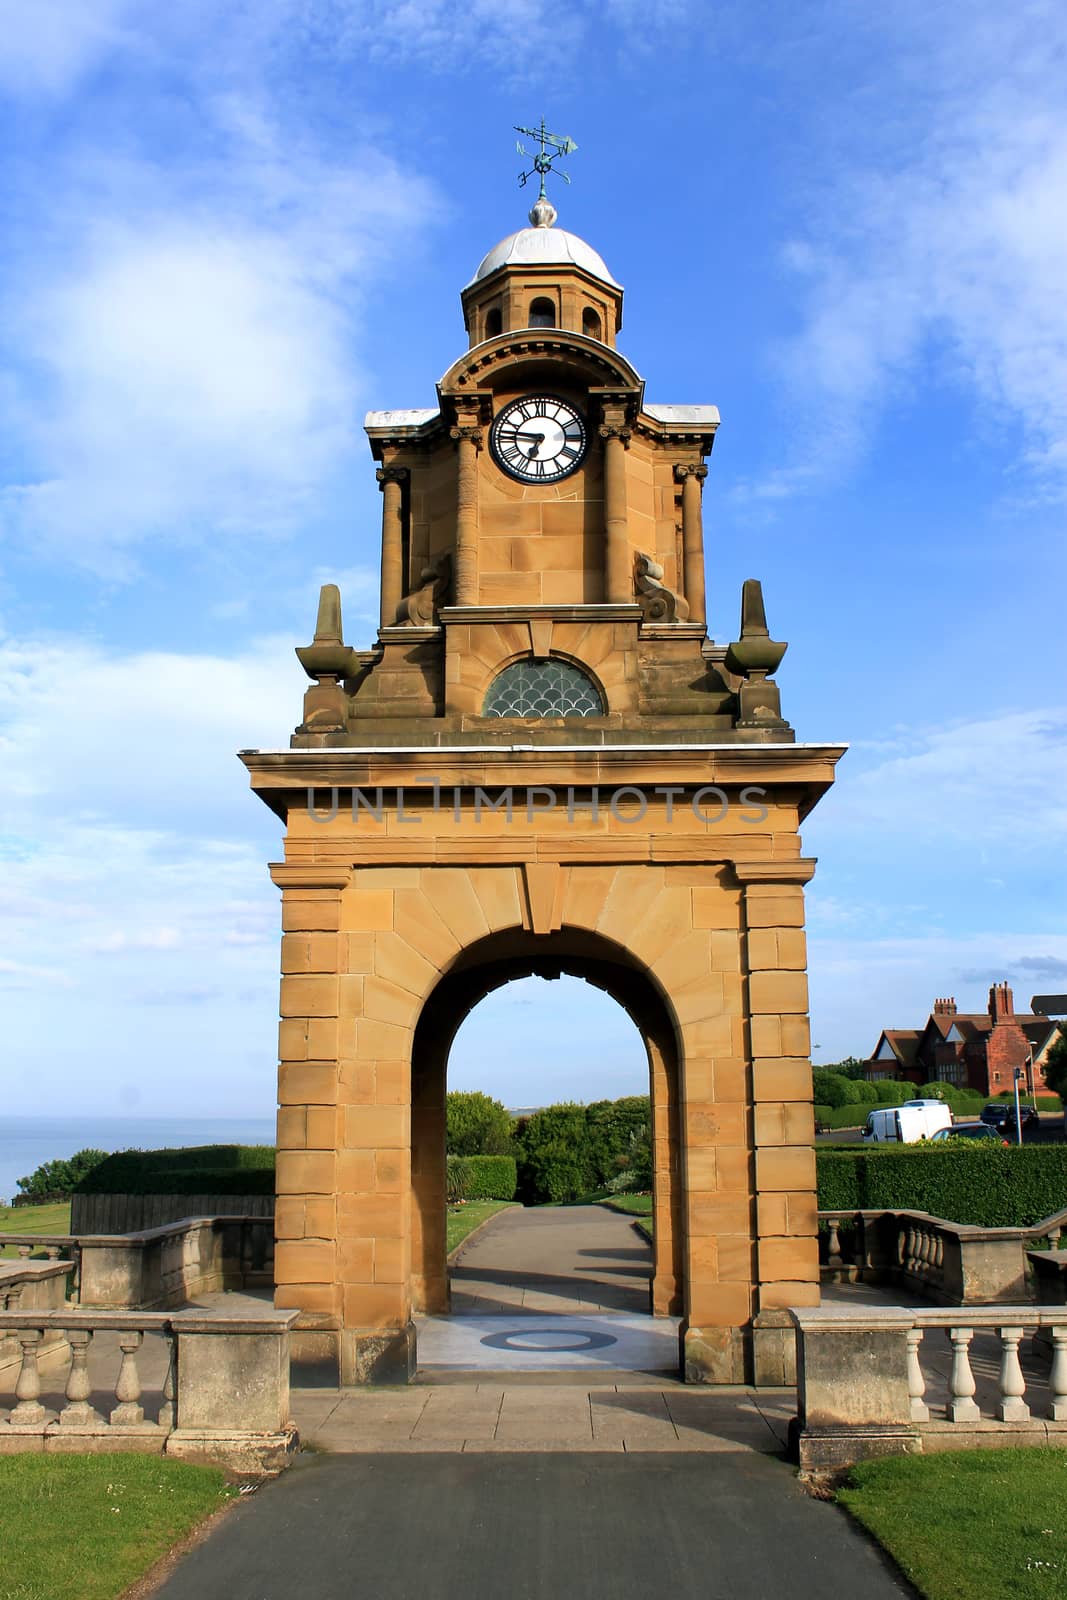 South Cliff Clock tower by speedfighter